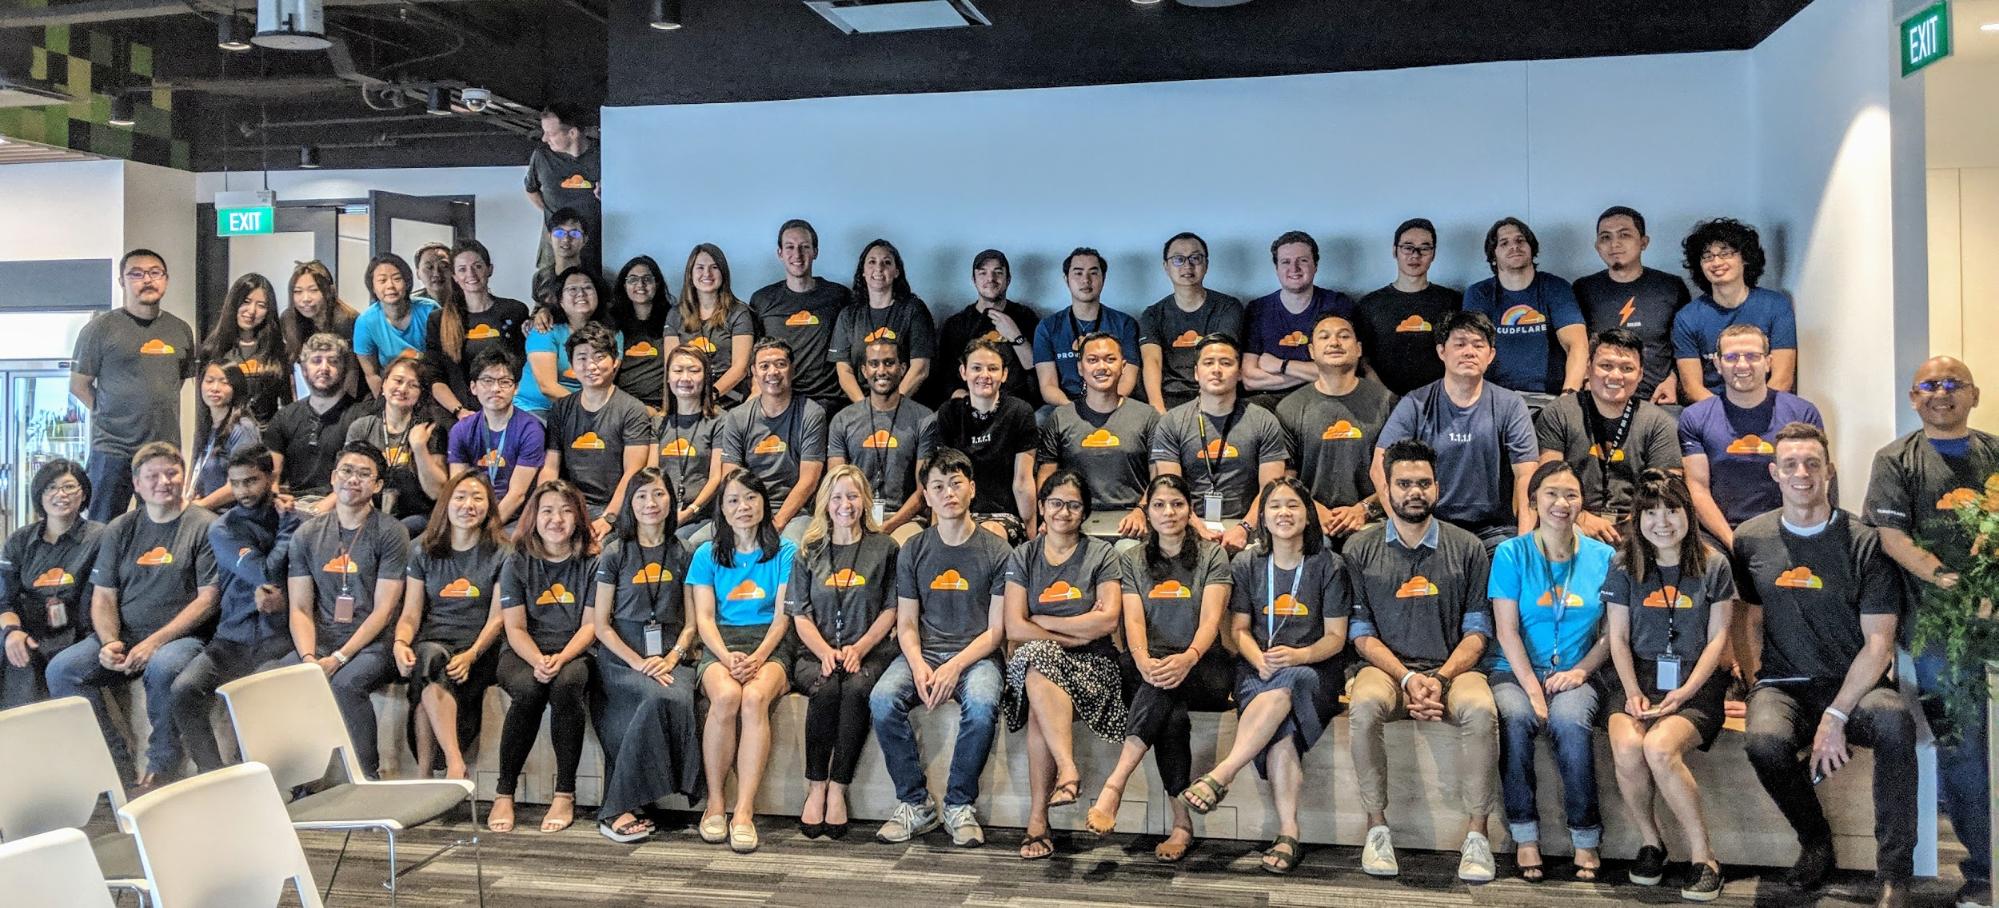 Reflecting on my first year as Head of Cloudflare Asia